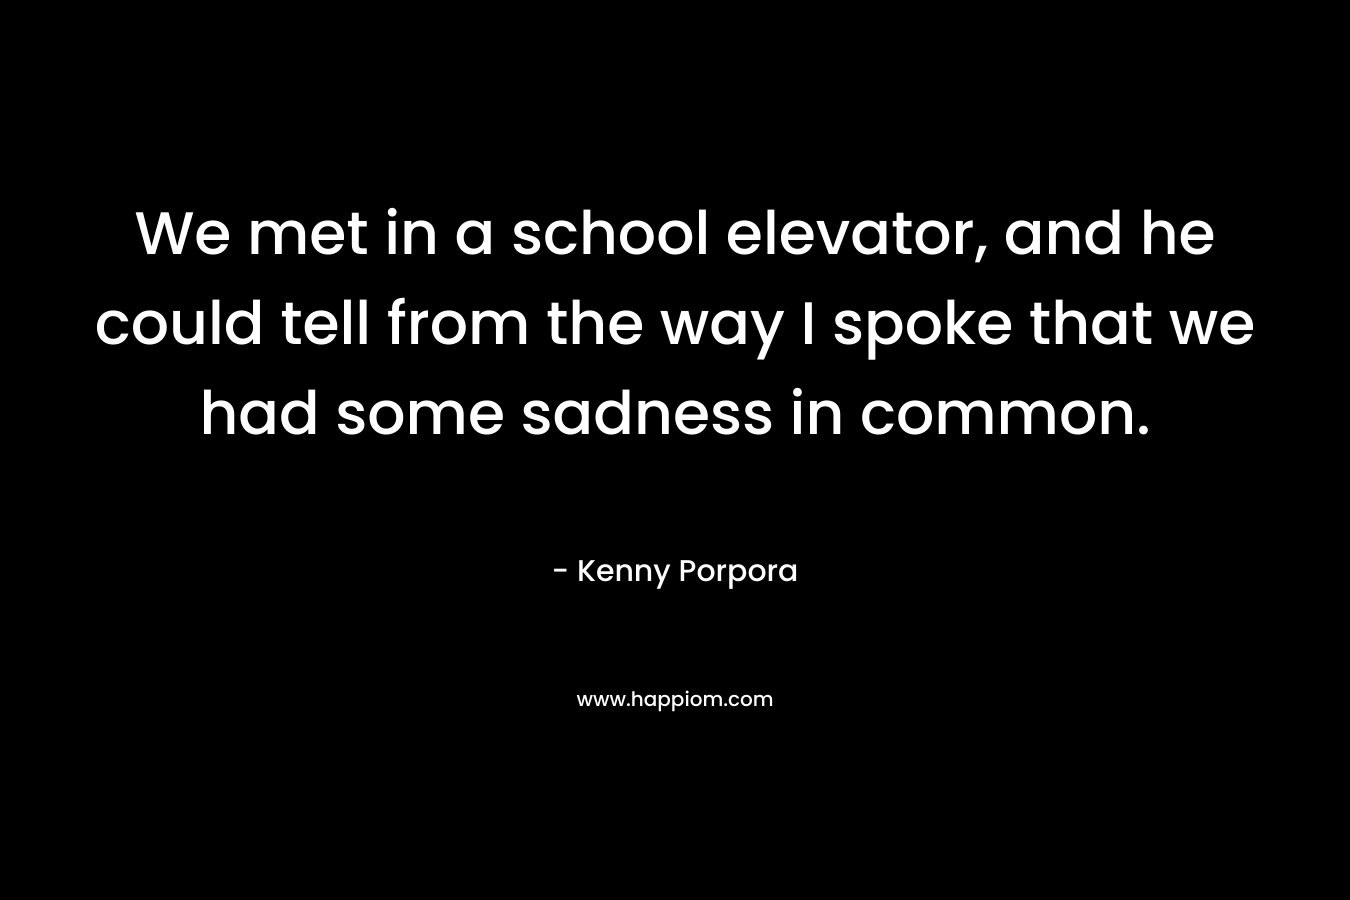 We met in a school elevator, and he could tell from the way I spoke that we had some sadness in common.